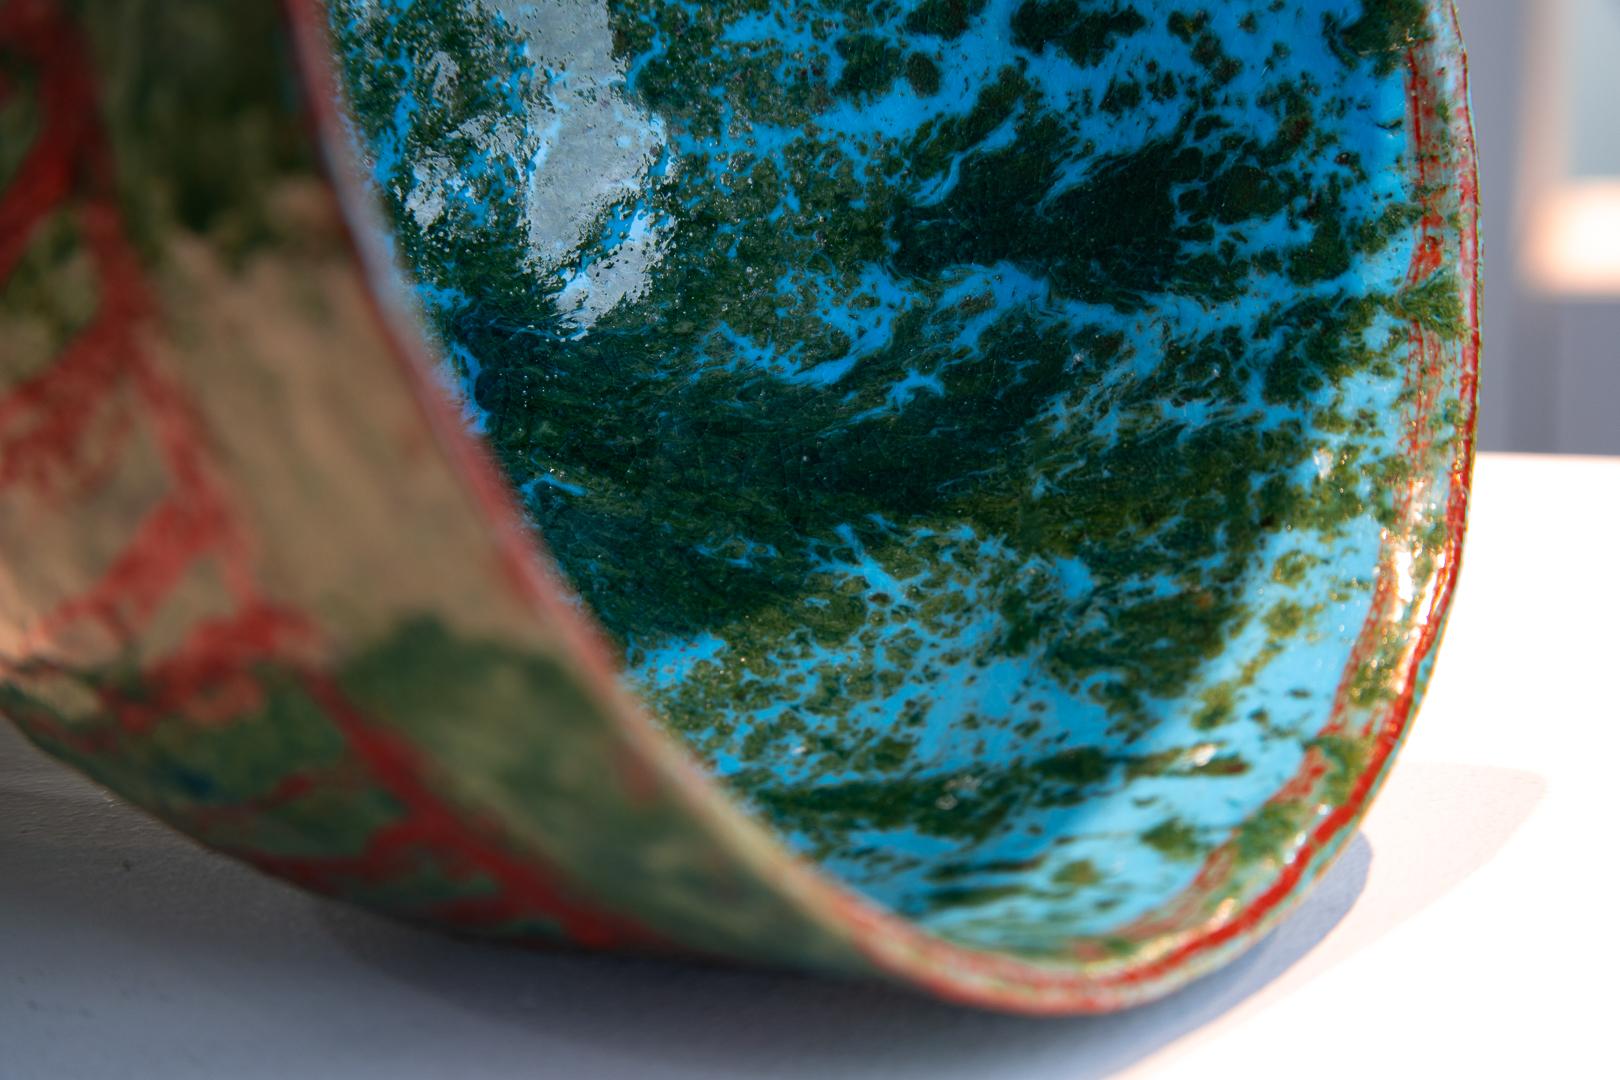 “Monumental Chalice” is a stunning rare monumental ceramic chalice by the world re-known Italian potter Guido Gambone. The shape is light and delicate with a comfortable weight. Turquoise and green glaze the piece in a lovely mixture of colors with